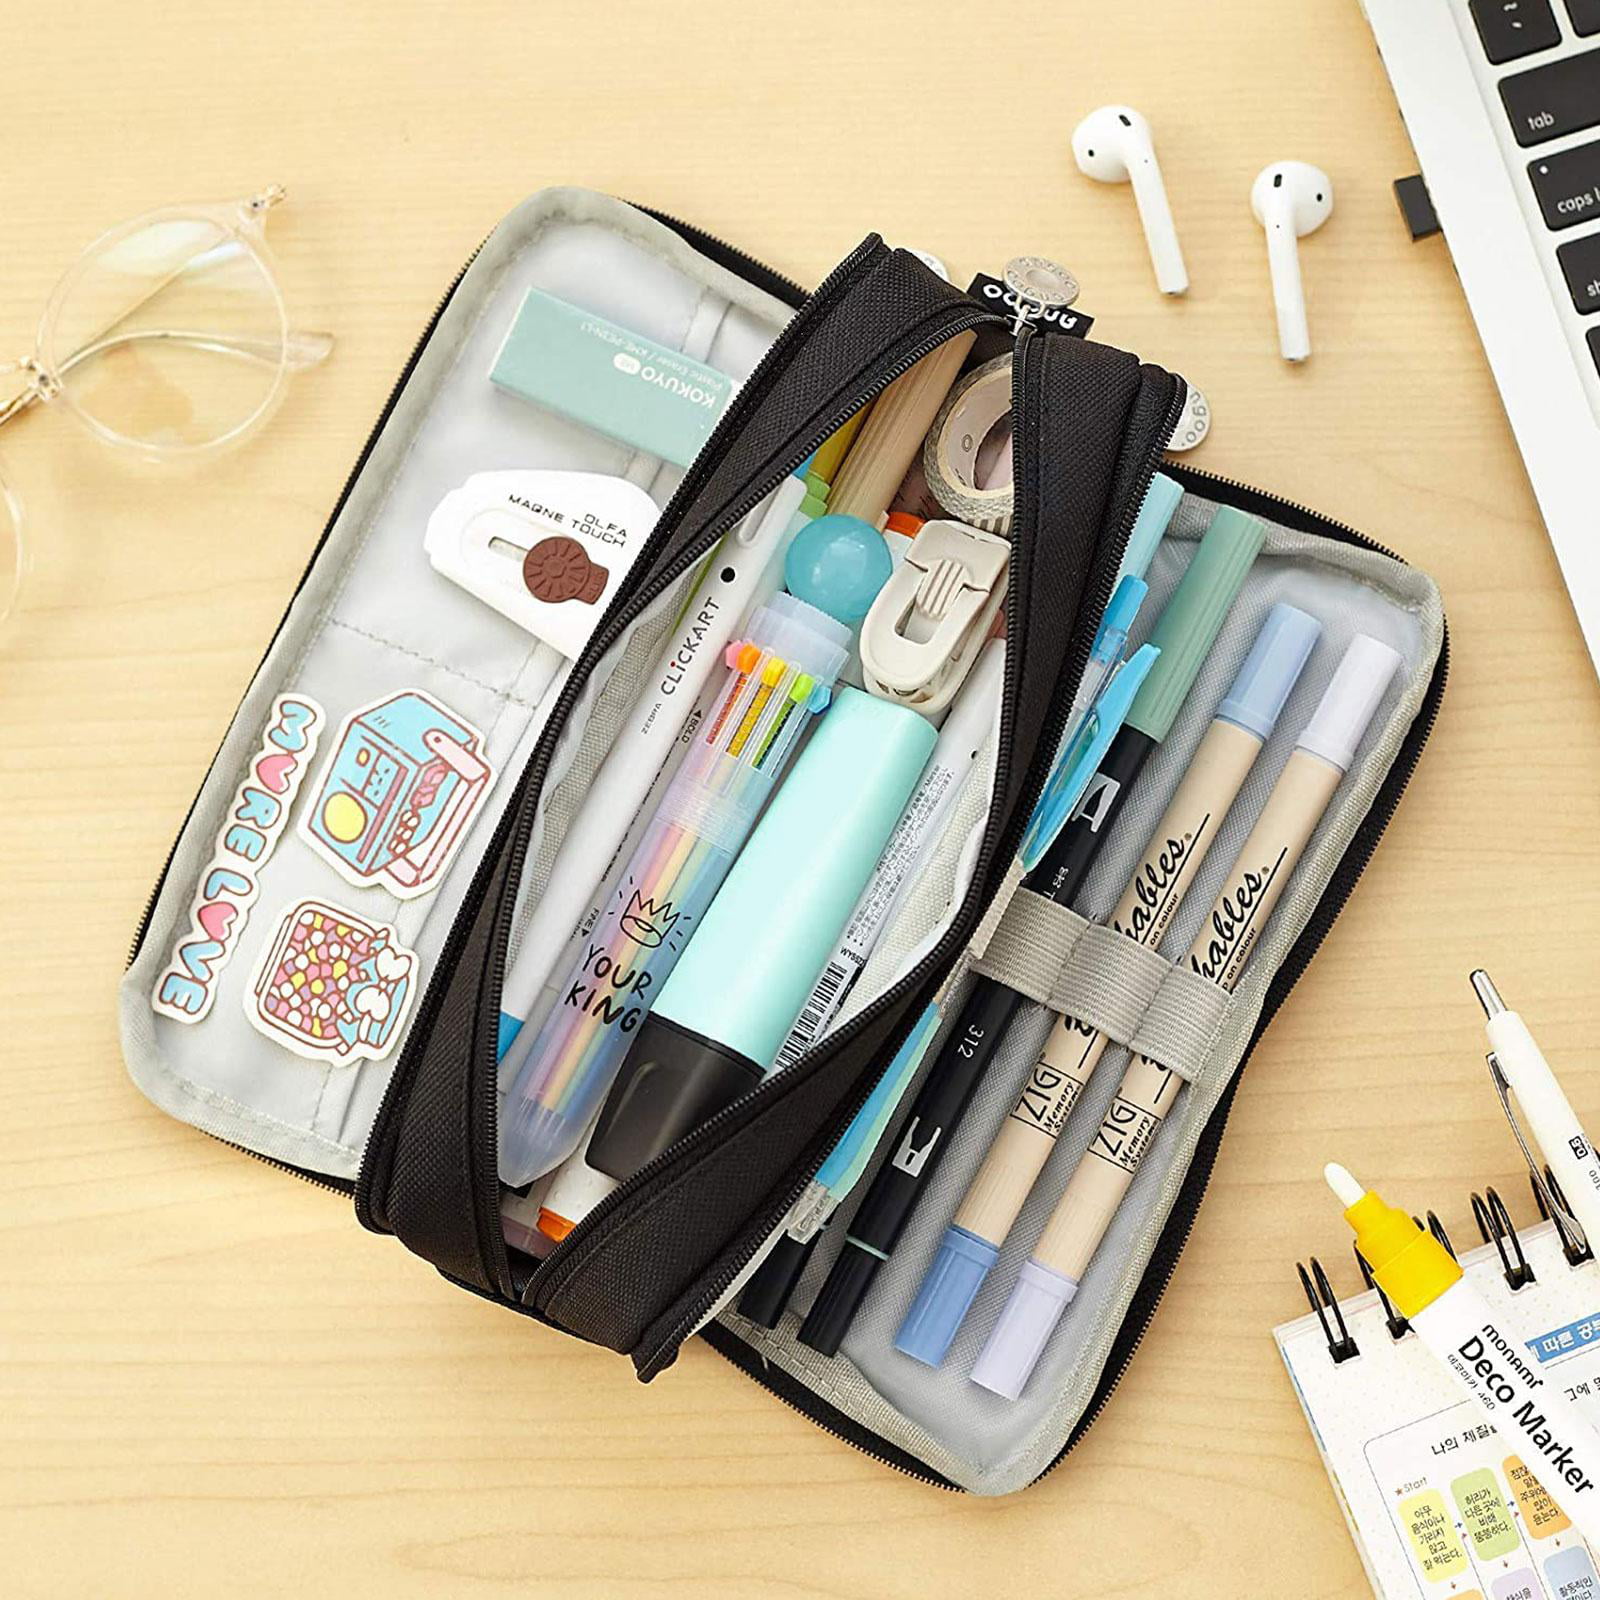 Angoo Corduroy Pen Bag Pencil Case Light Color Multi Slot Easy Handle  Storage Pouch Organizer for Stationery School Travel A6443